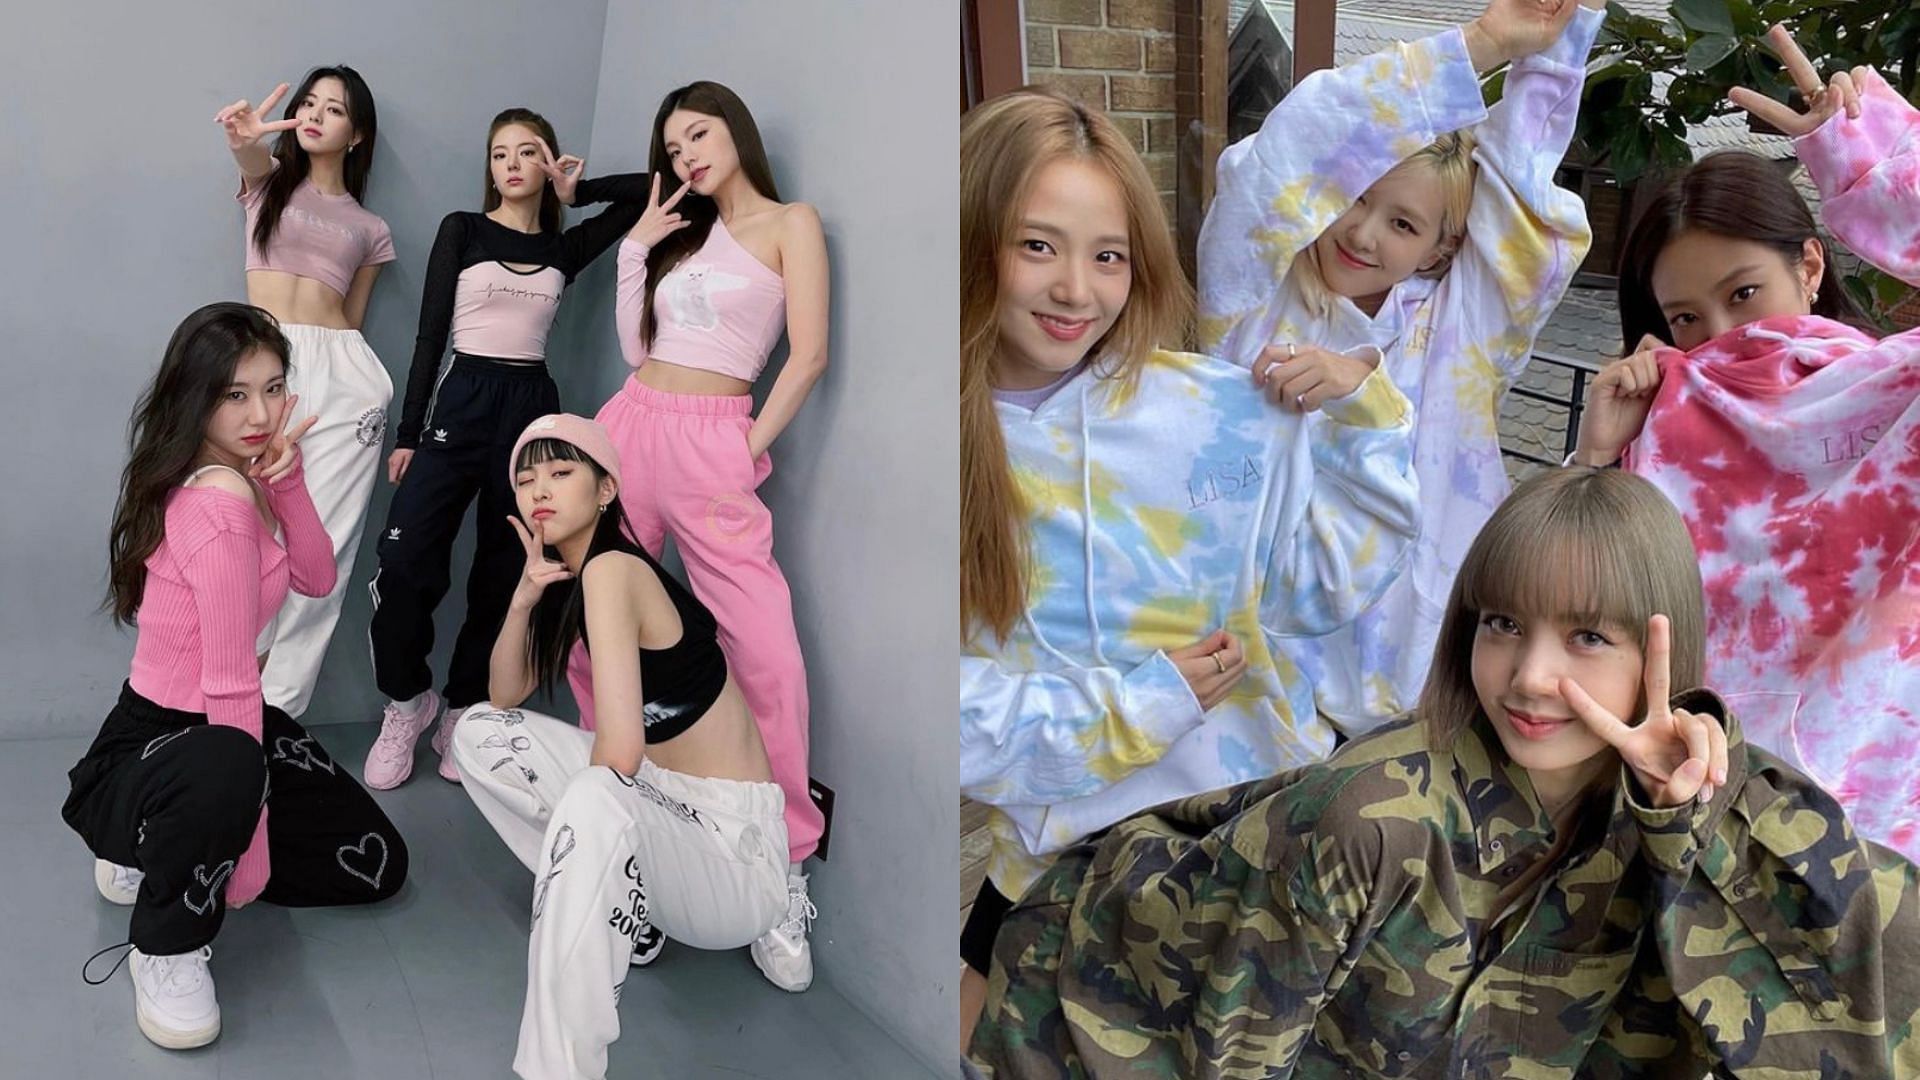 A still of the two K-pop girl groups (Image via @itzy.in.all.us/@jennierubyjane/Instagram)